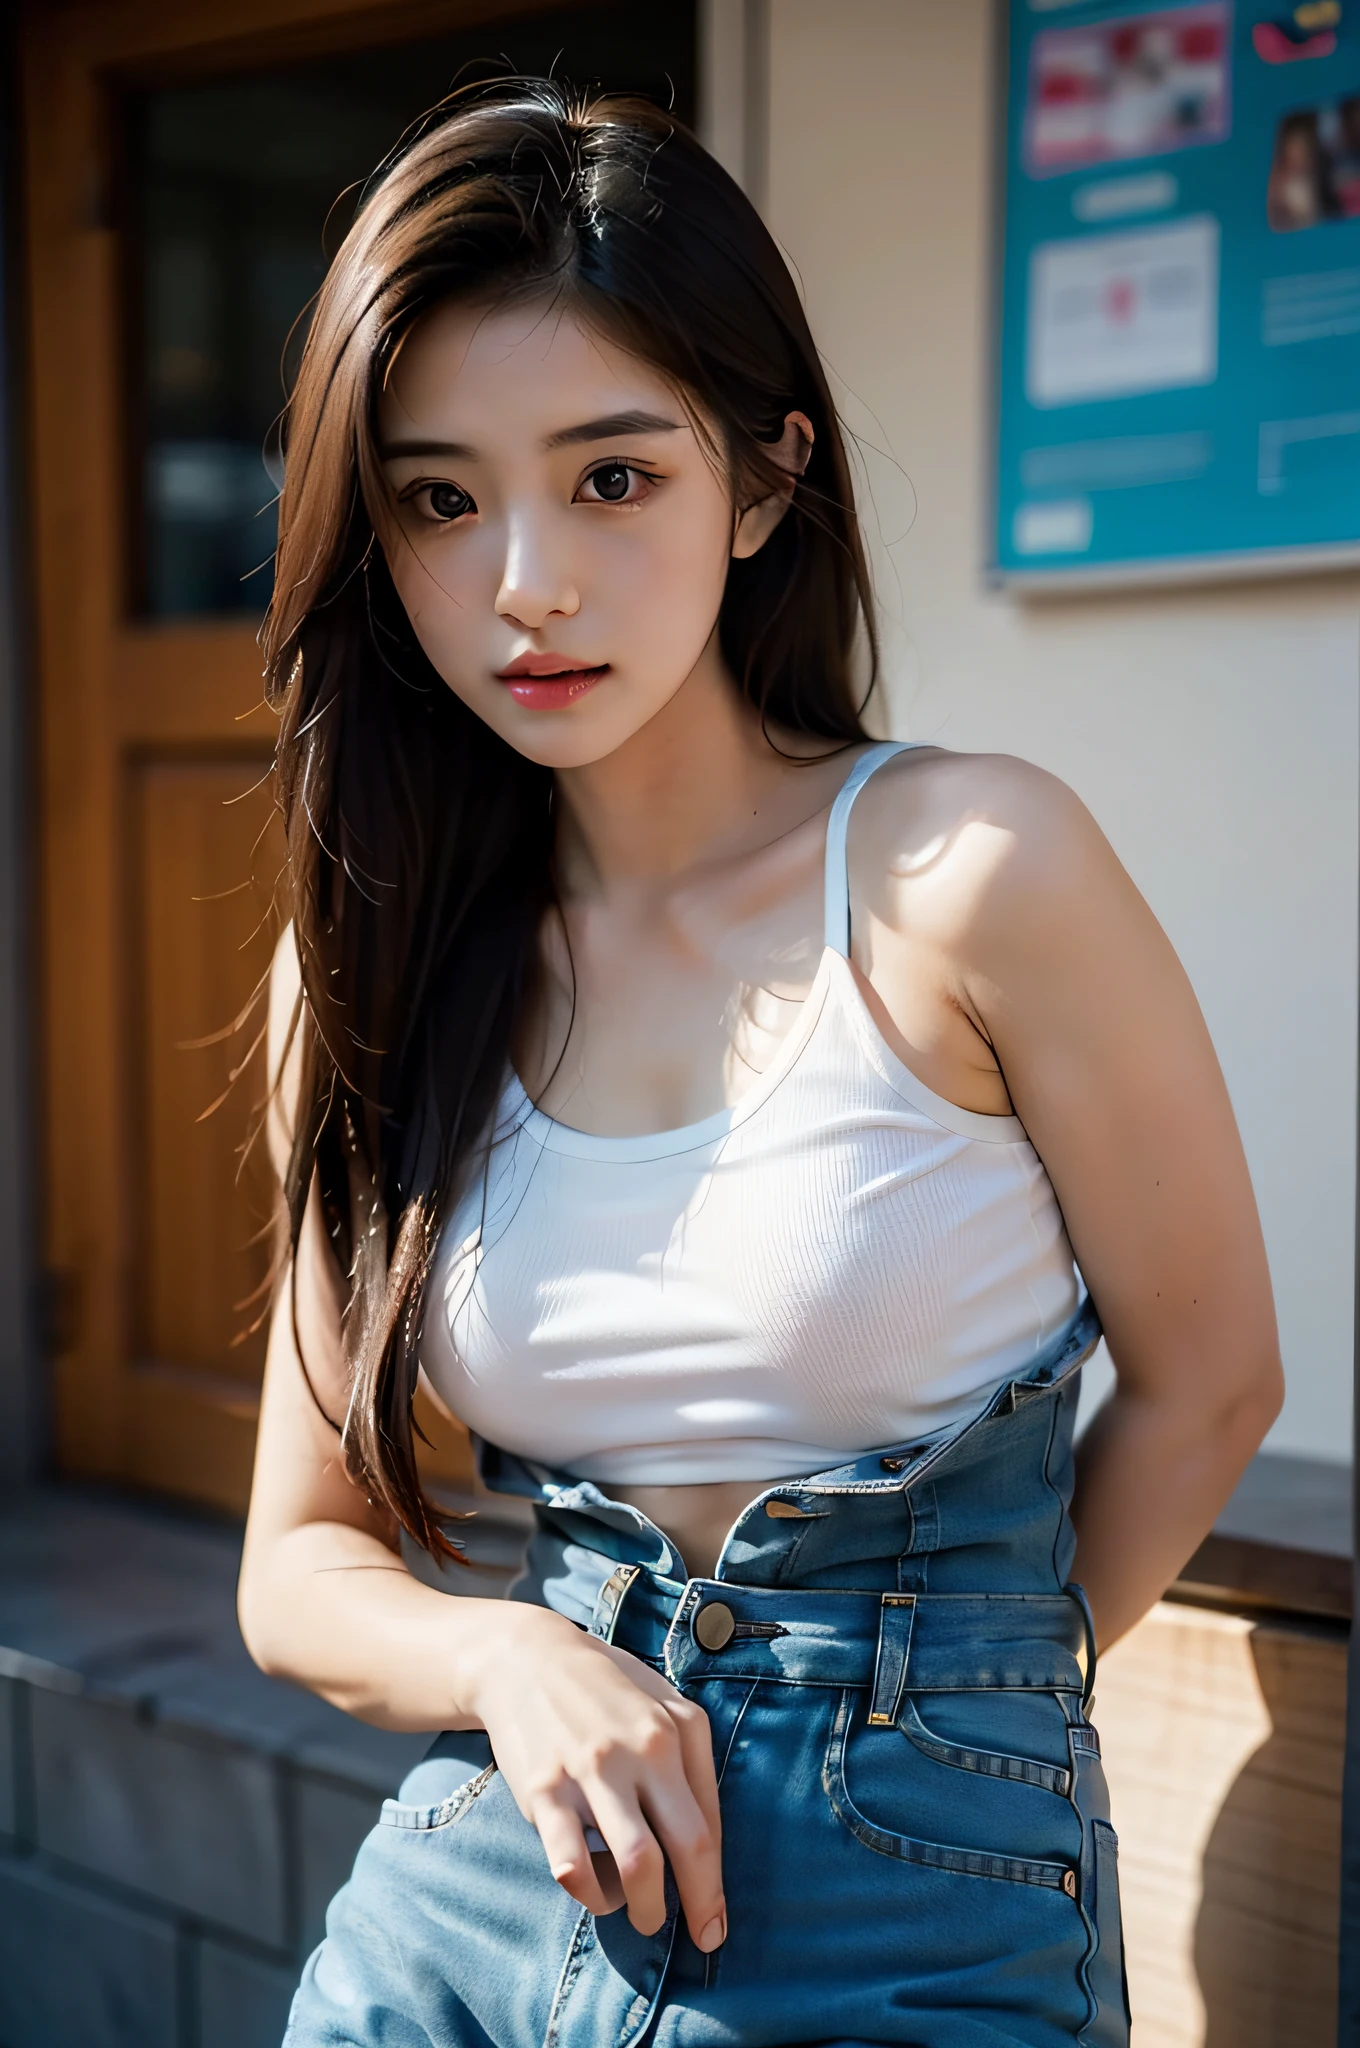 （Lifelike， A high resolution：1.3）， 1 girl with a perfect body， Super fine face and eyes，long whitr hair， Tank top of random colors：1.2， short jeans pants， Bigboobs，